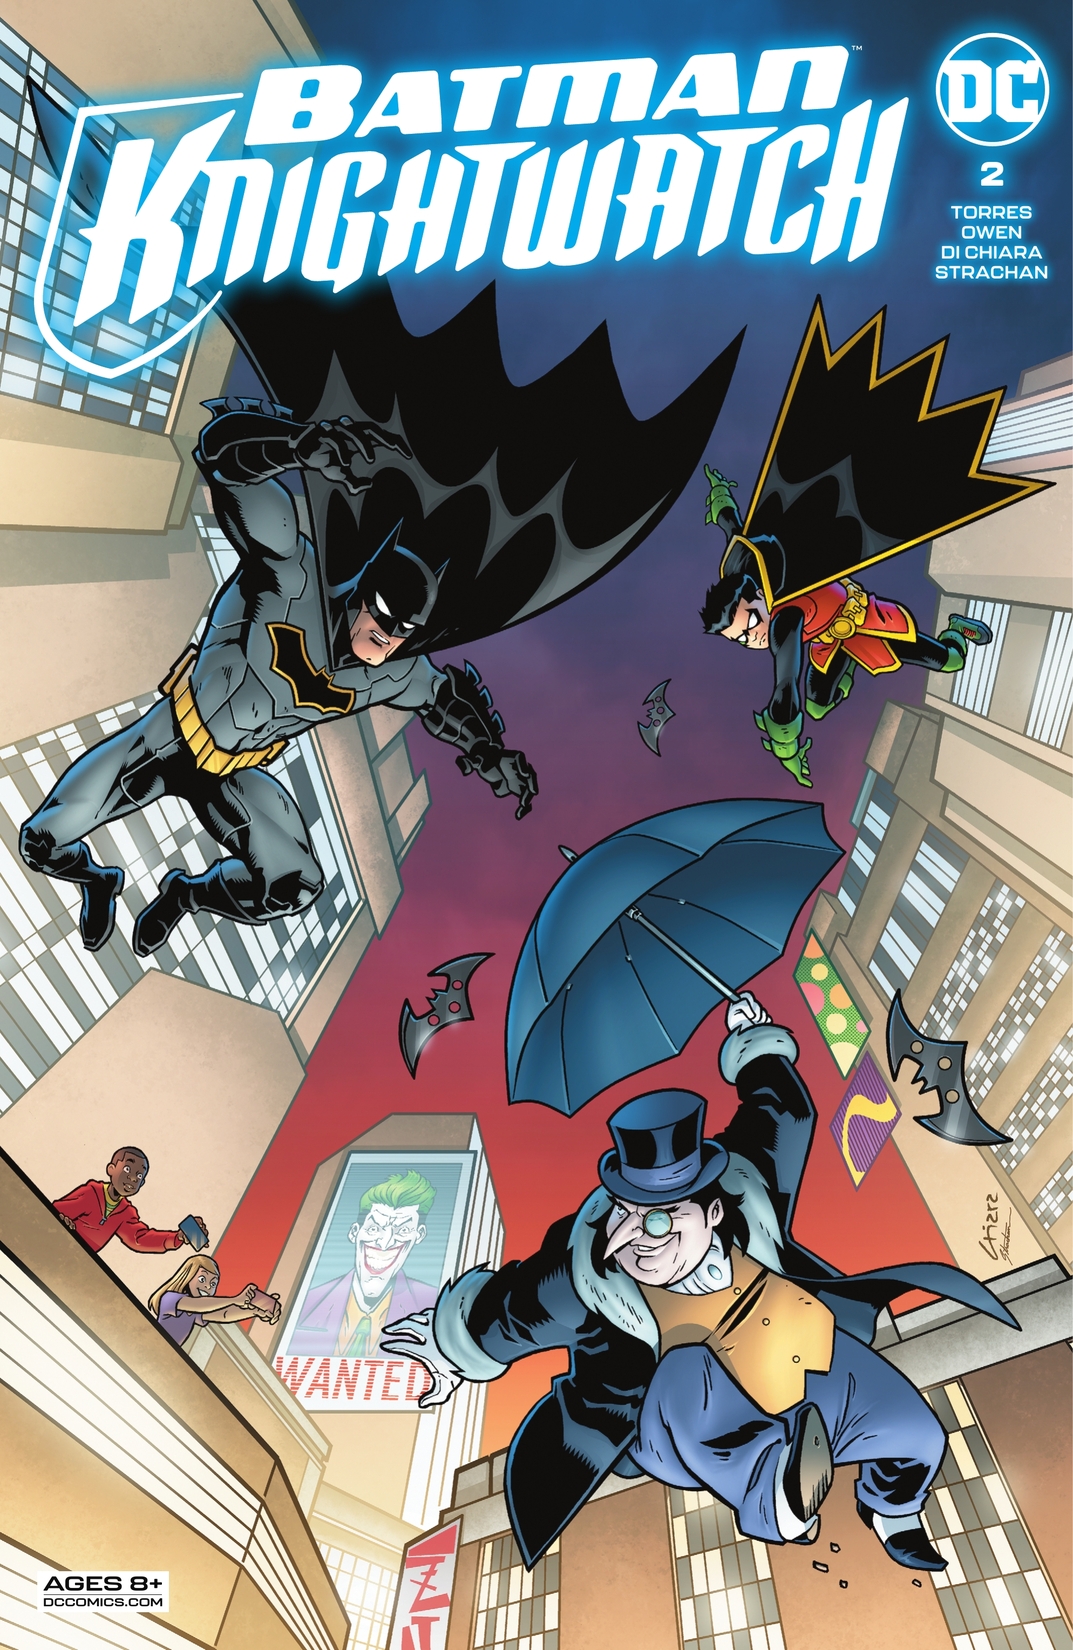 Batman - Knightwatch #2 preview images